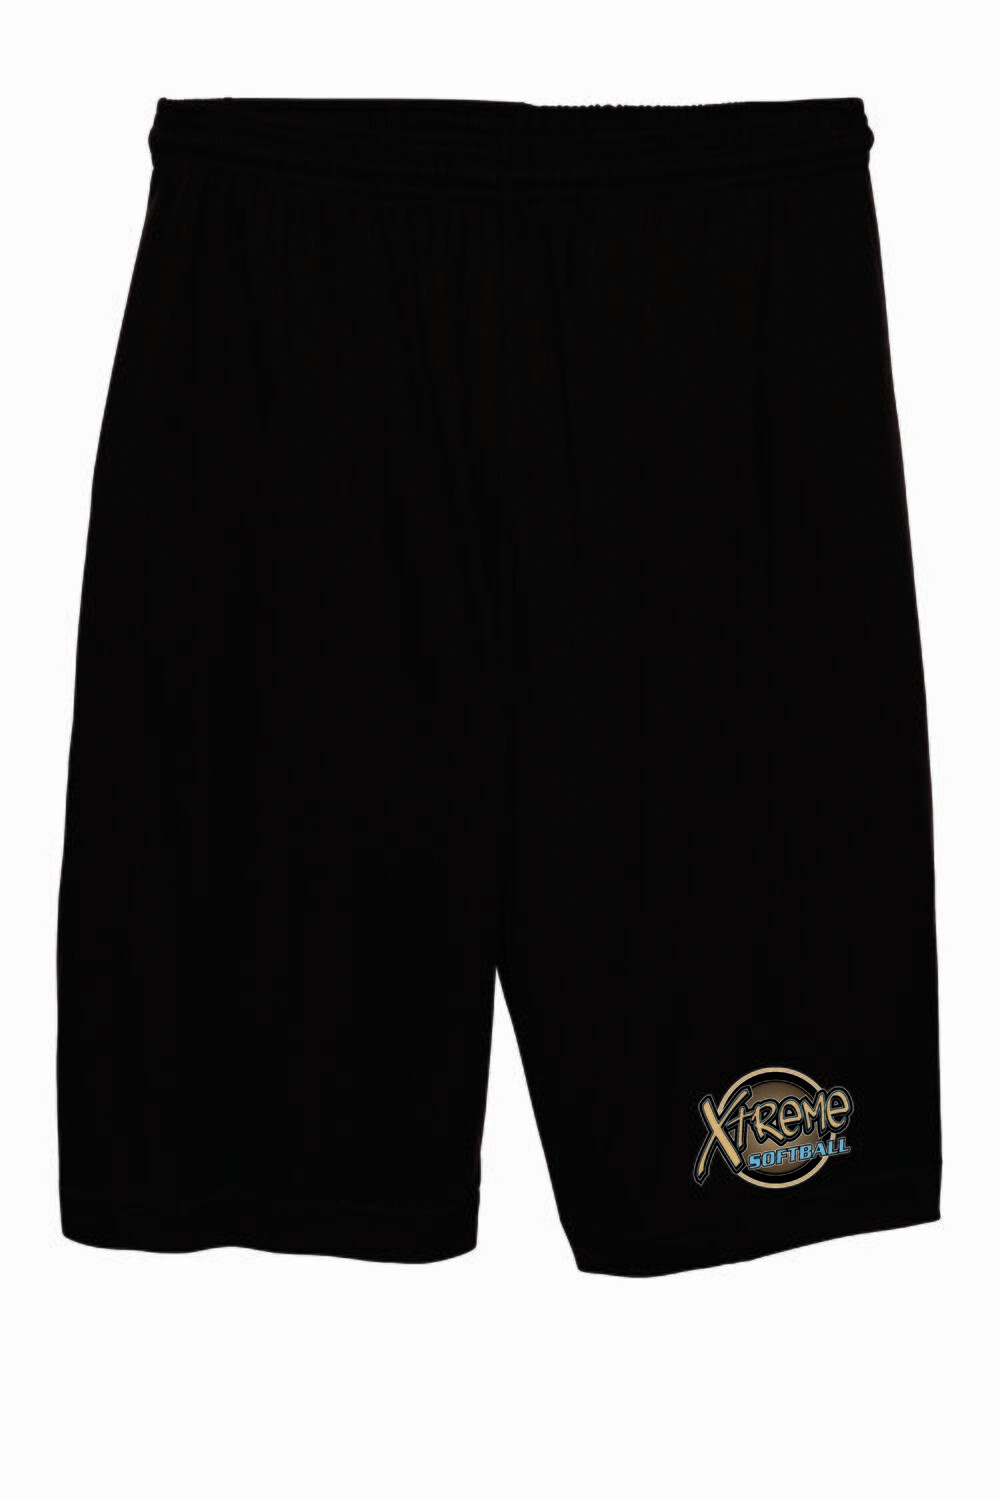 YST355
Sport-Tek® YOUTH PosiCharge® Competitor™ Short